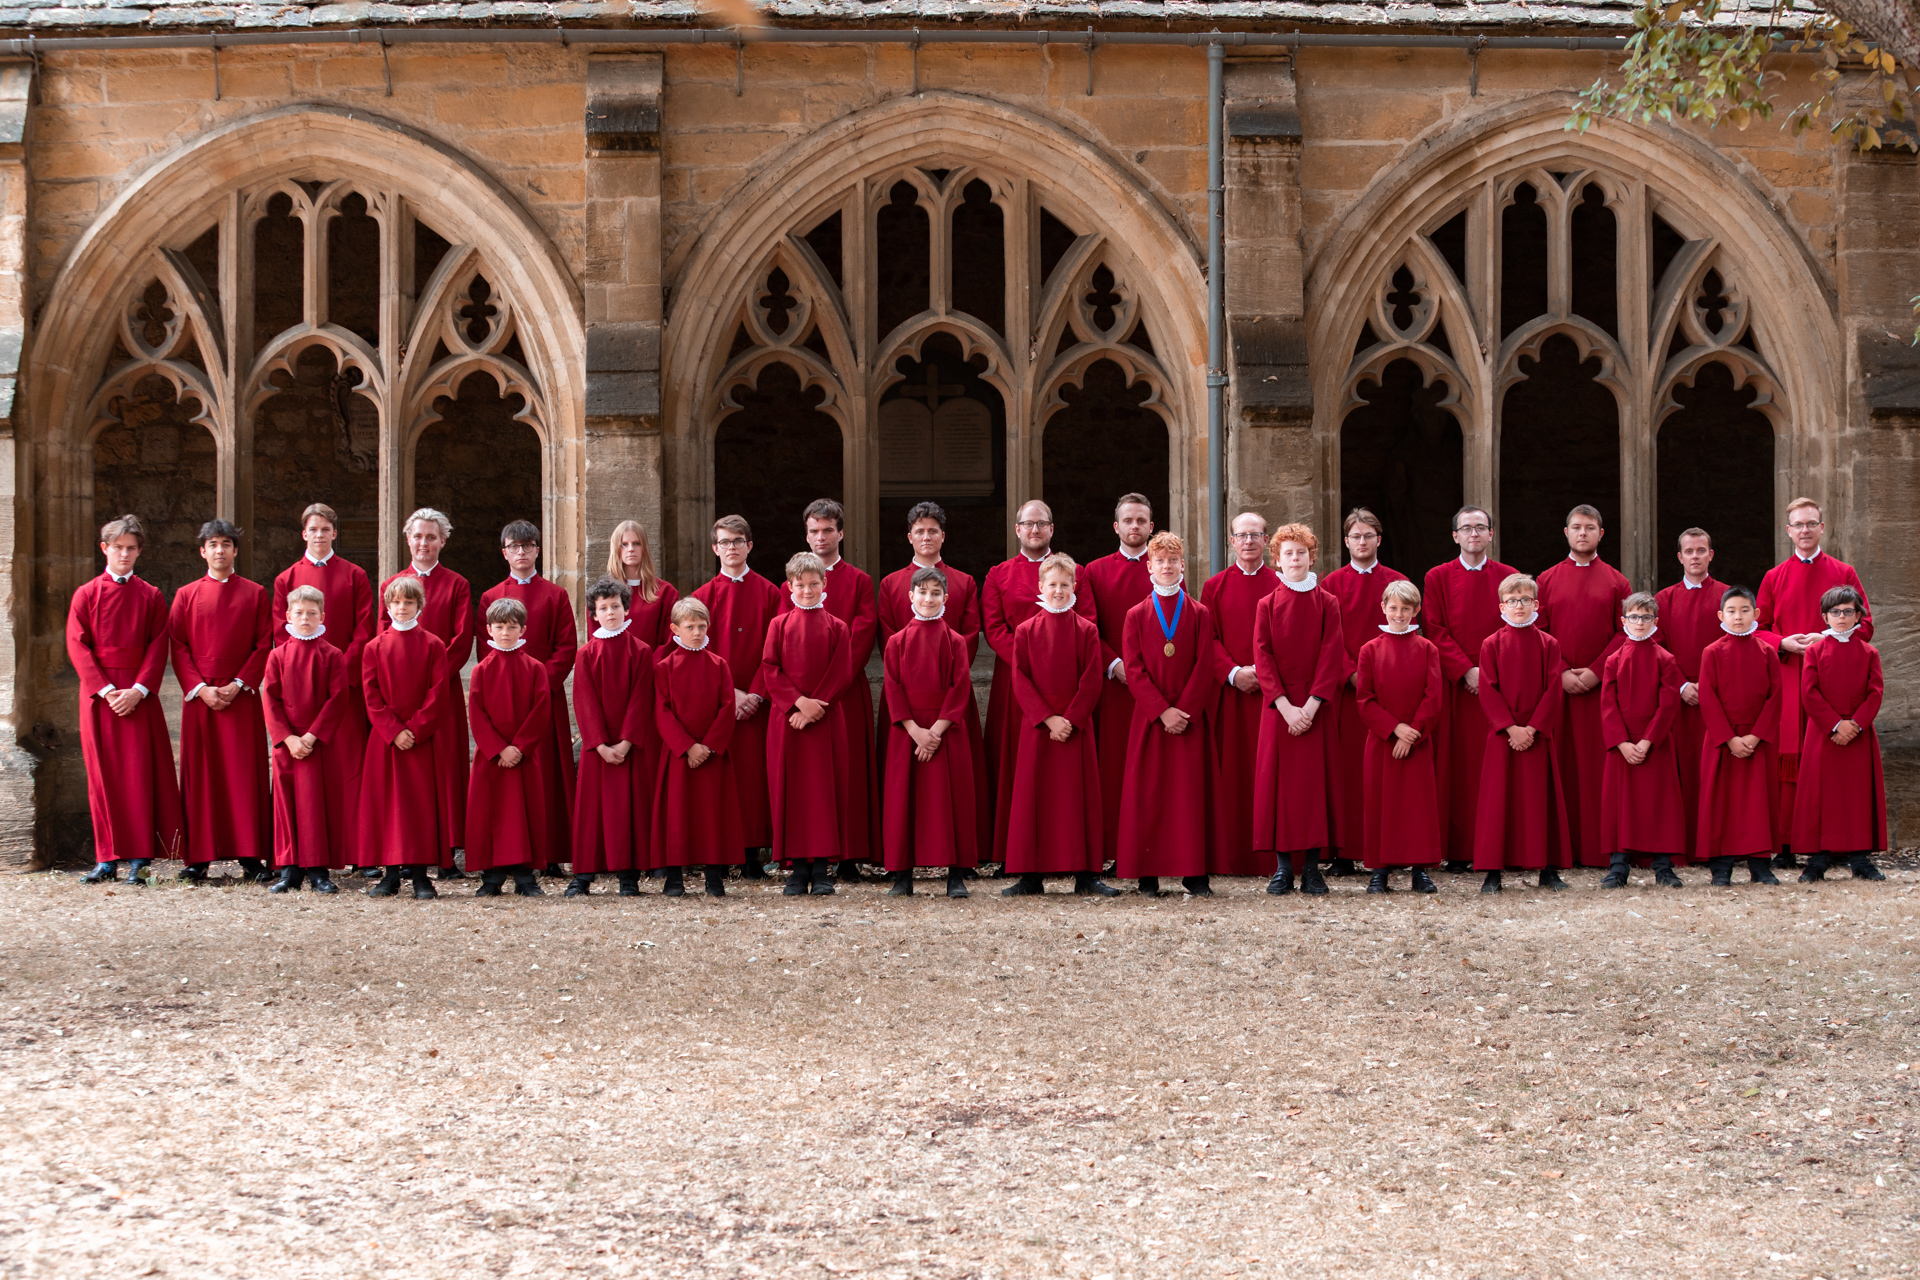 New College Choir in the New College Cloisters